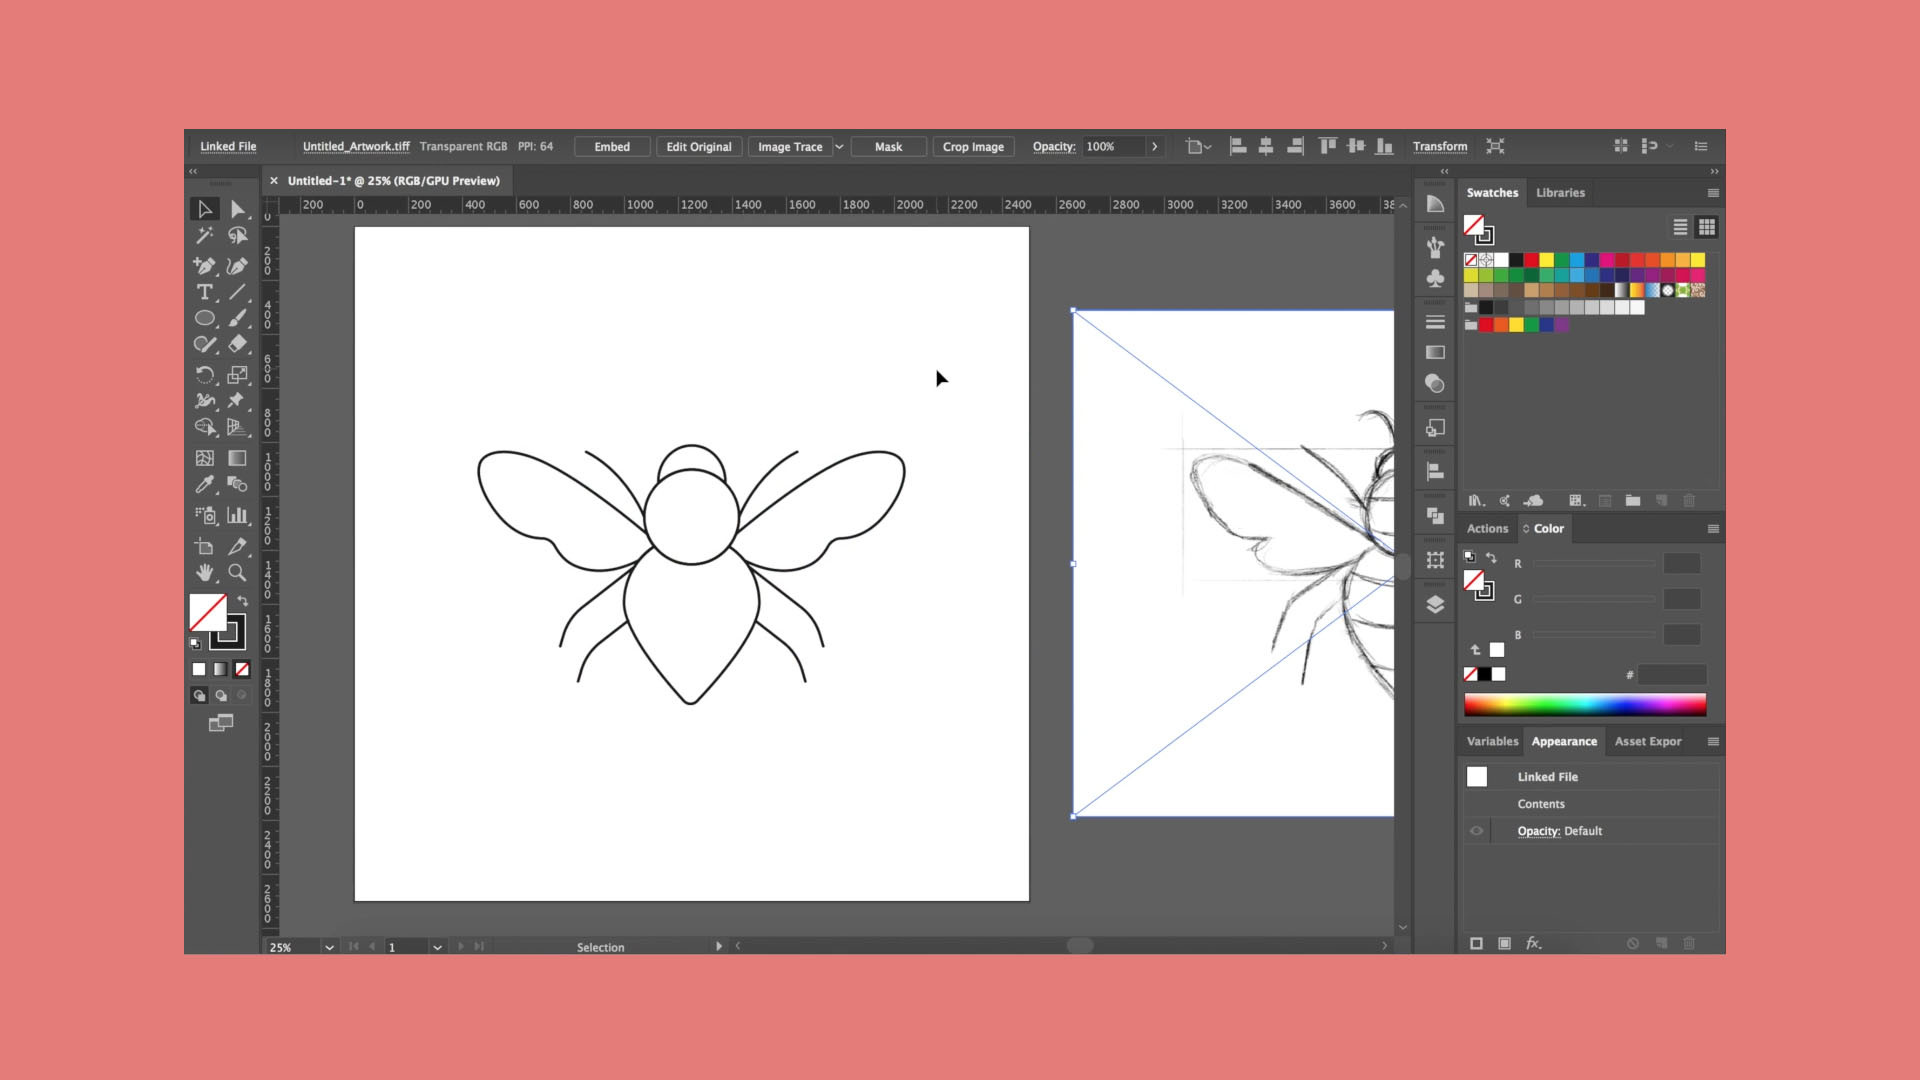 a screenshot of a adobe illustrator document containing an illustration of a moth